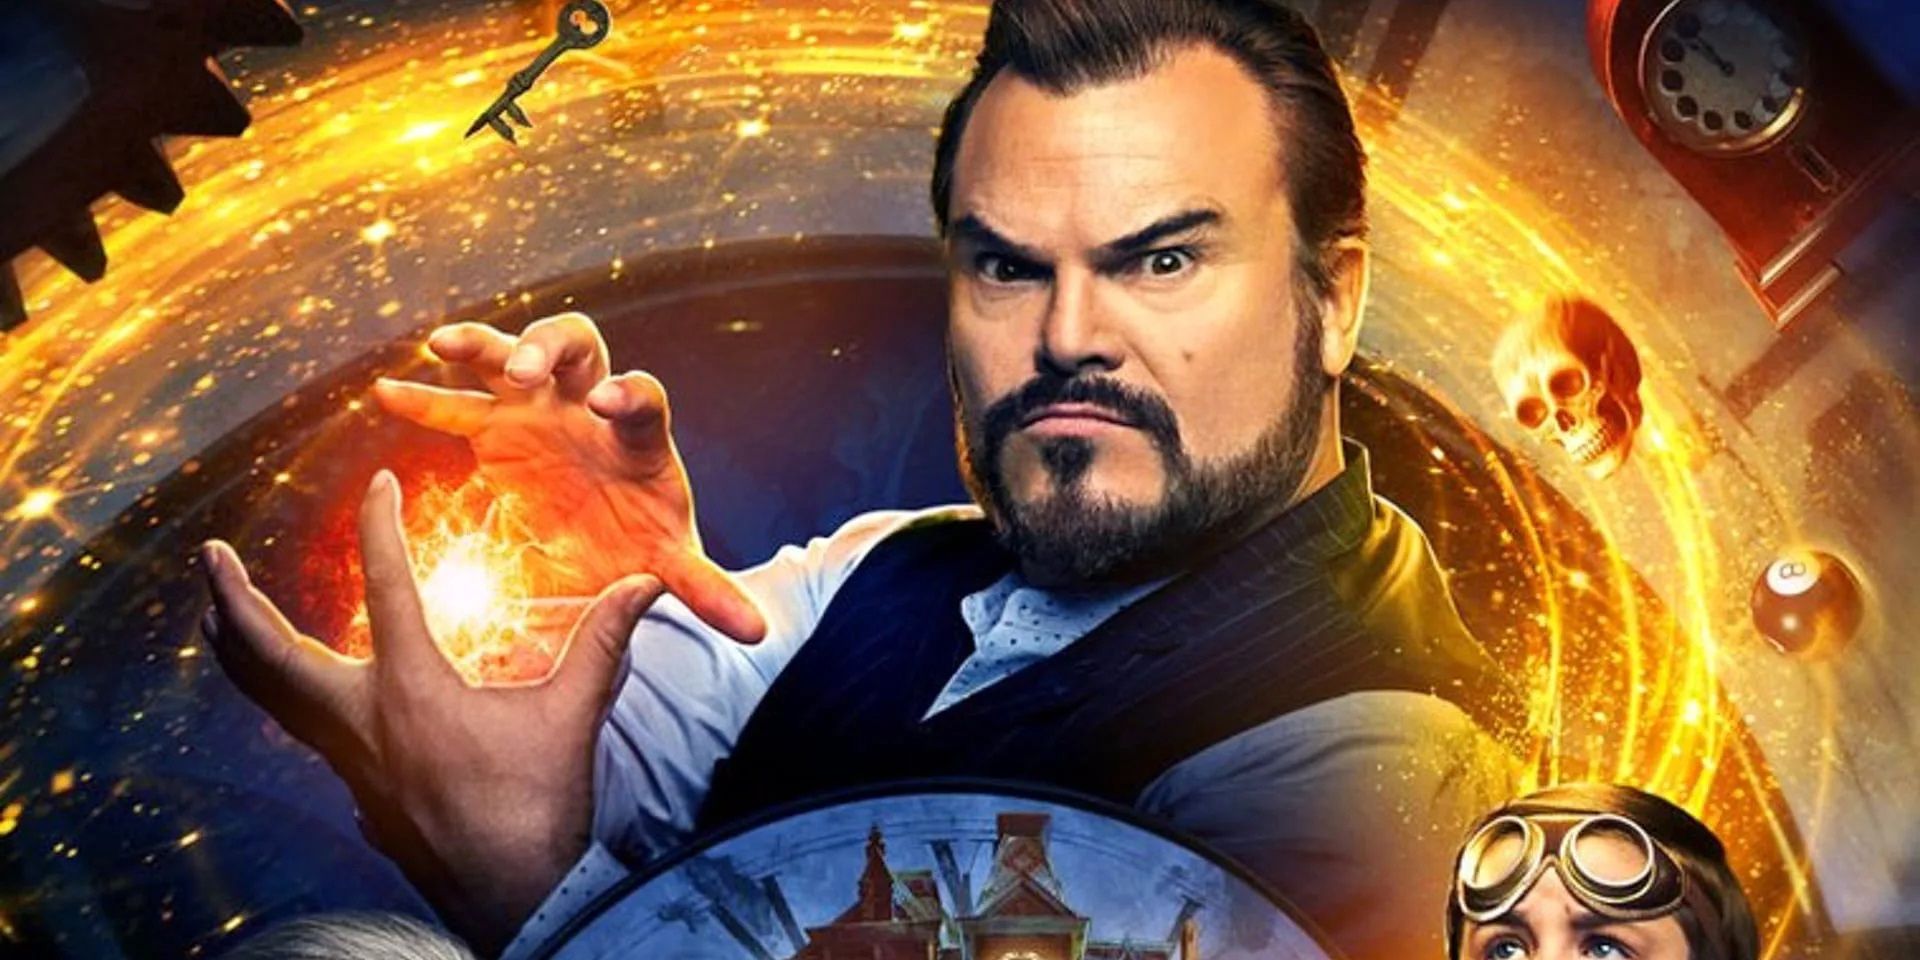 Jack Black in The House With a Clock In Its Walls